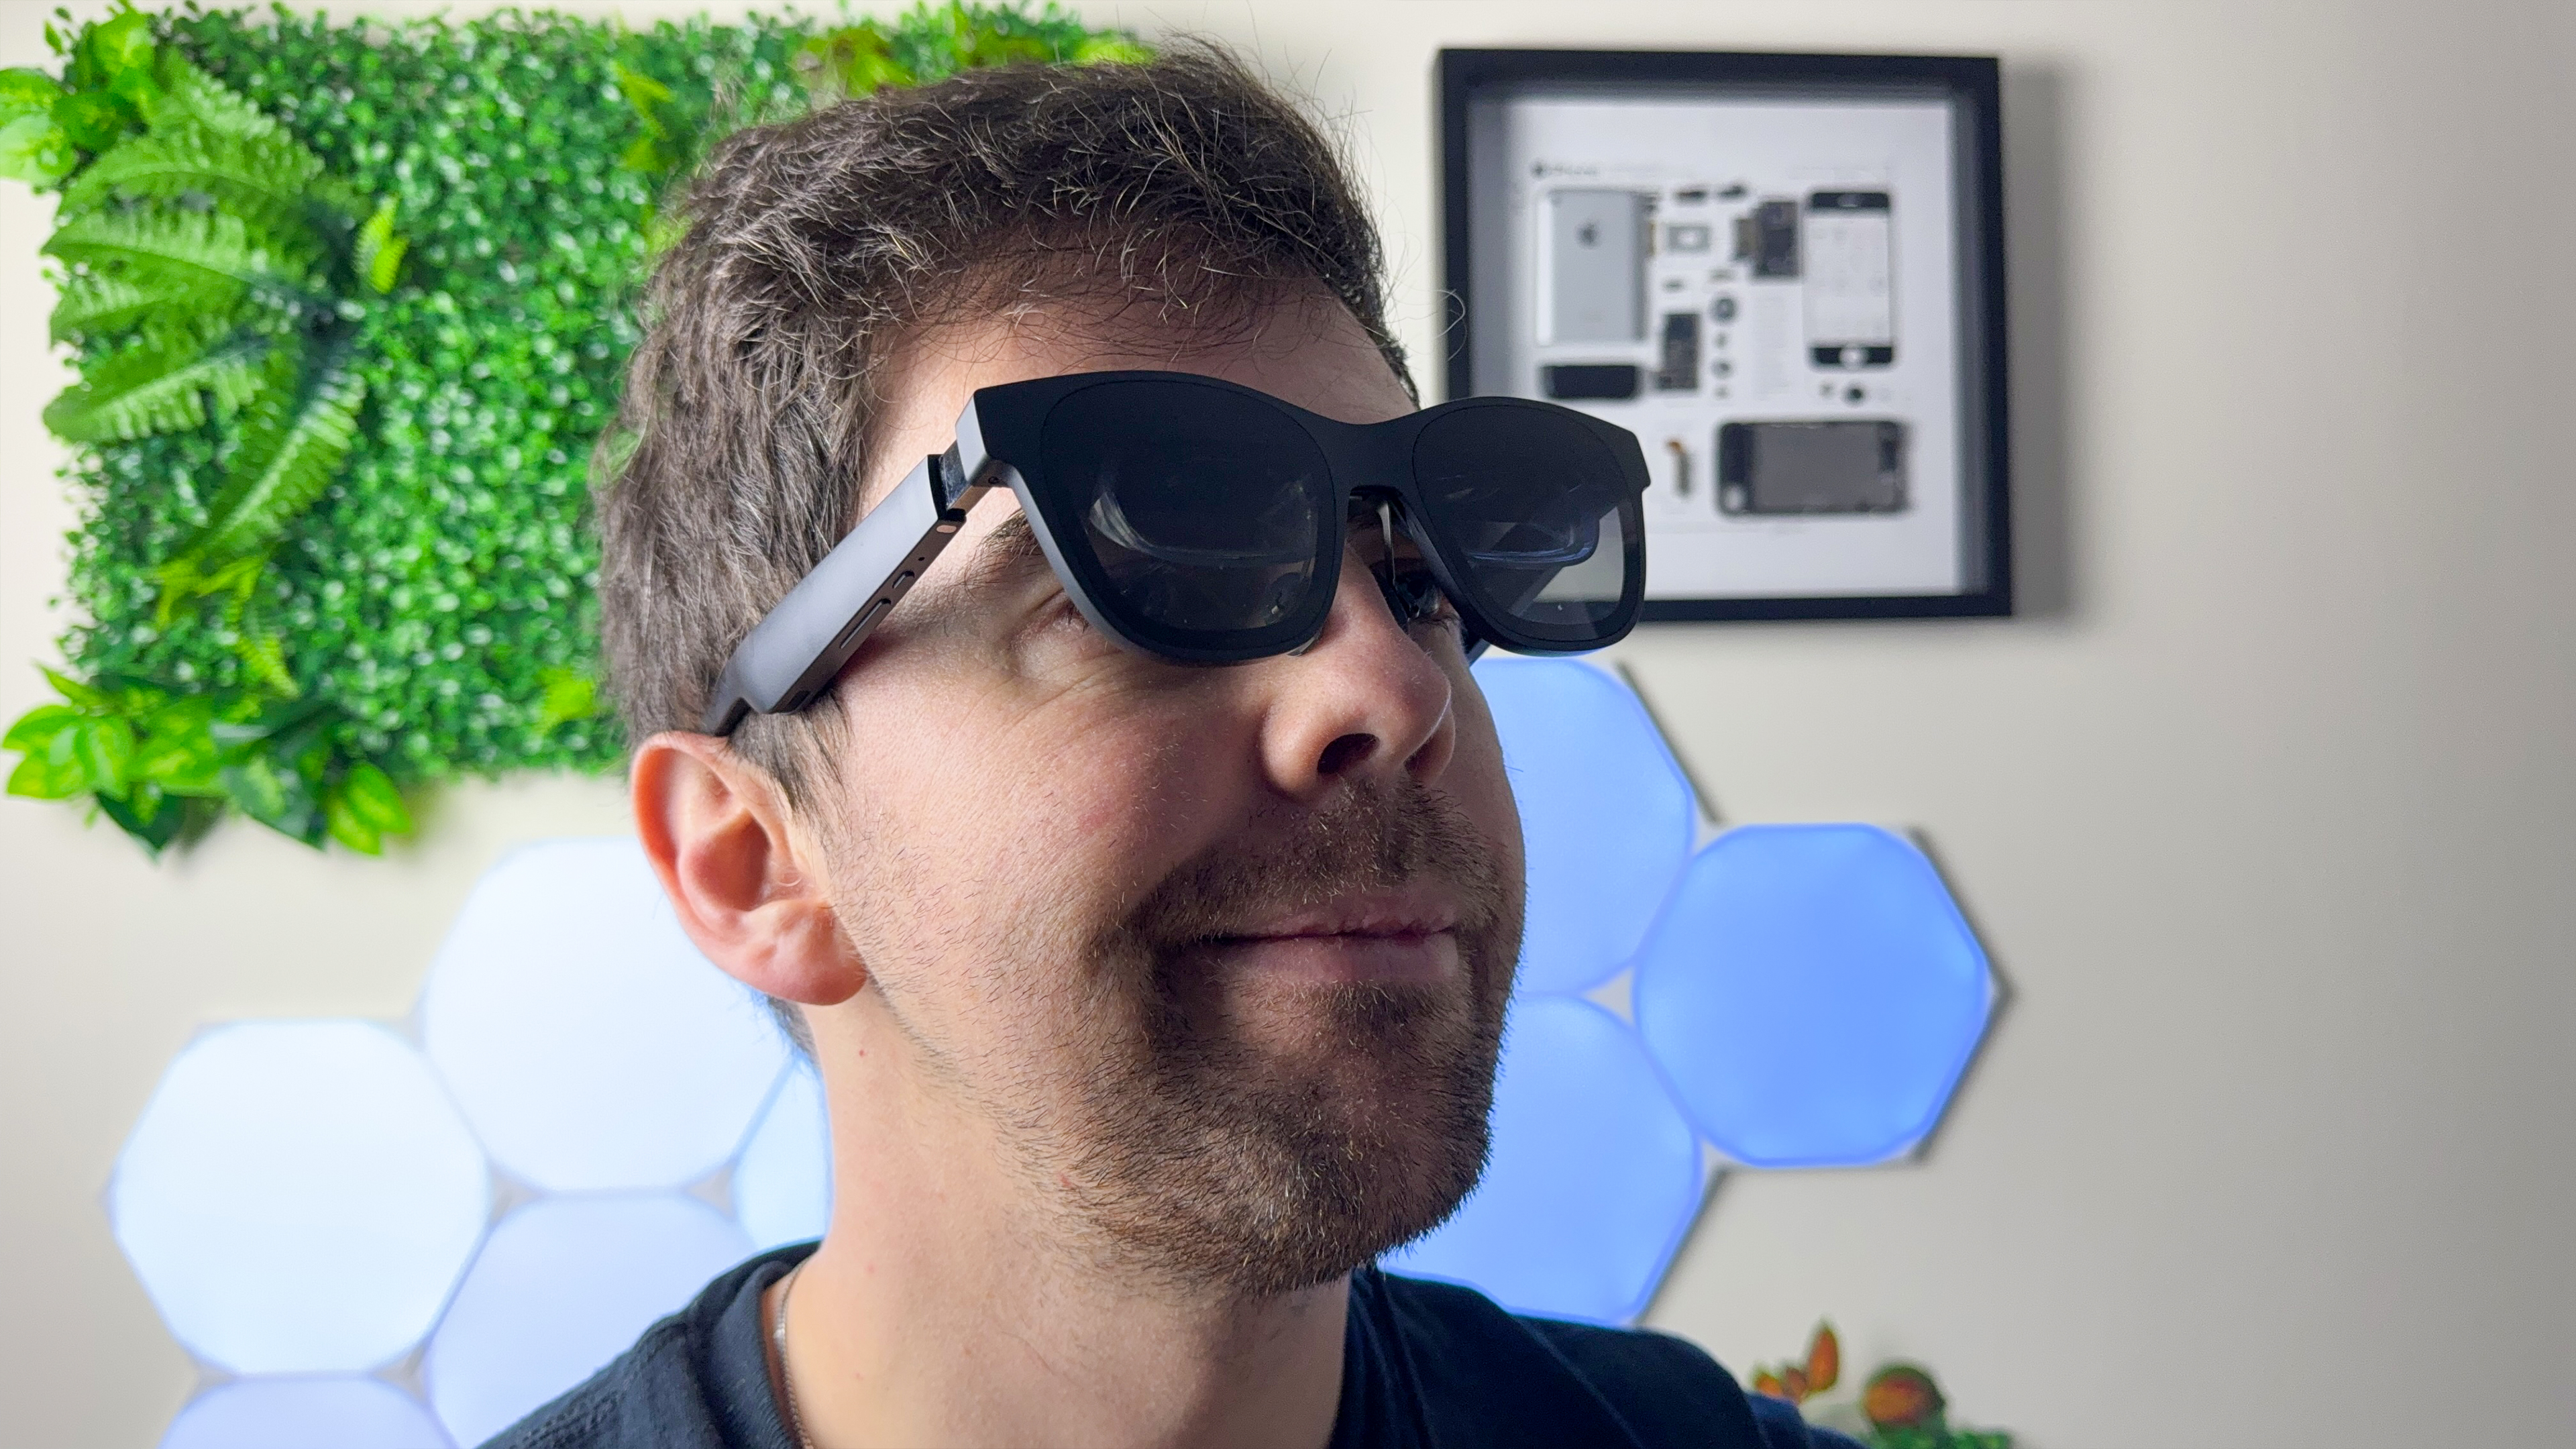 I replaced my monitor and TV with these AR glasses — here's what